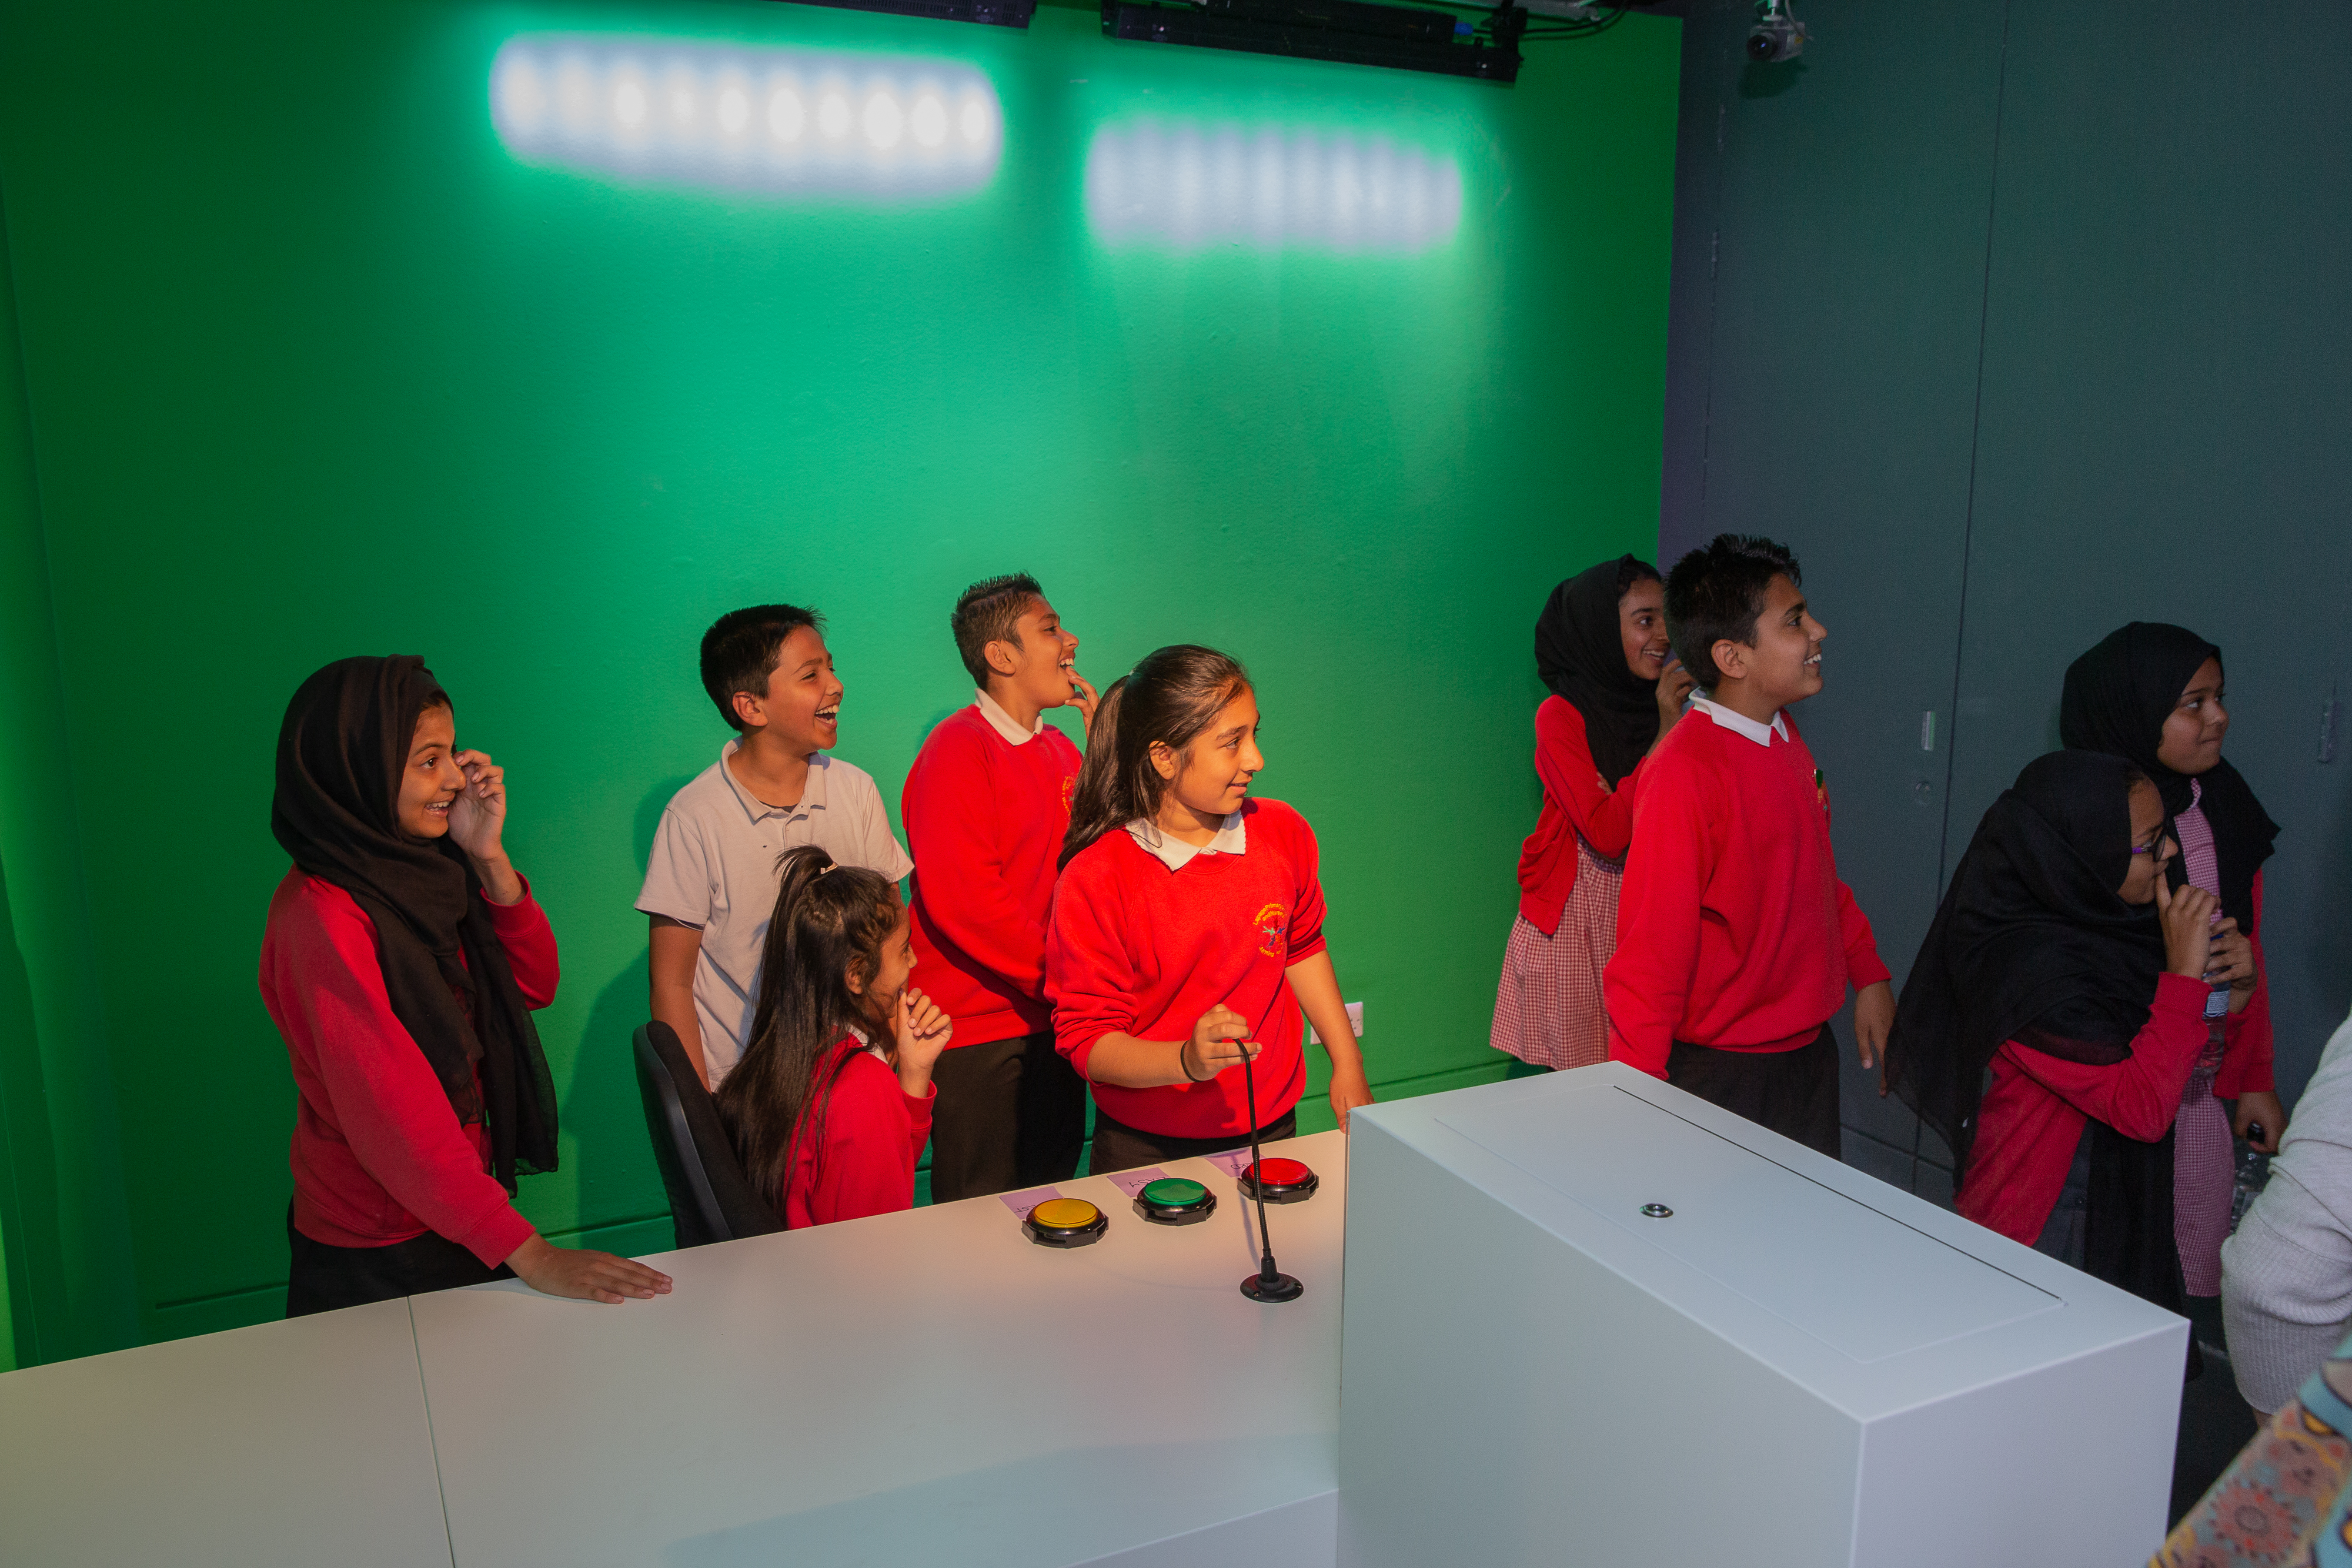 Students test their skills as sports presenters at the Action Replay exhibition